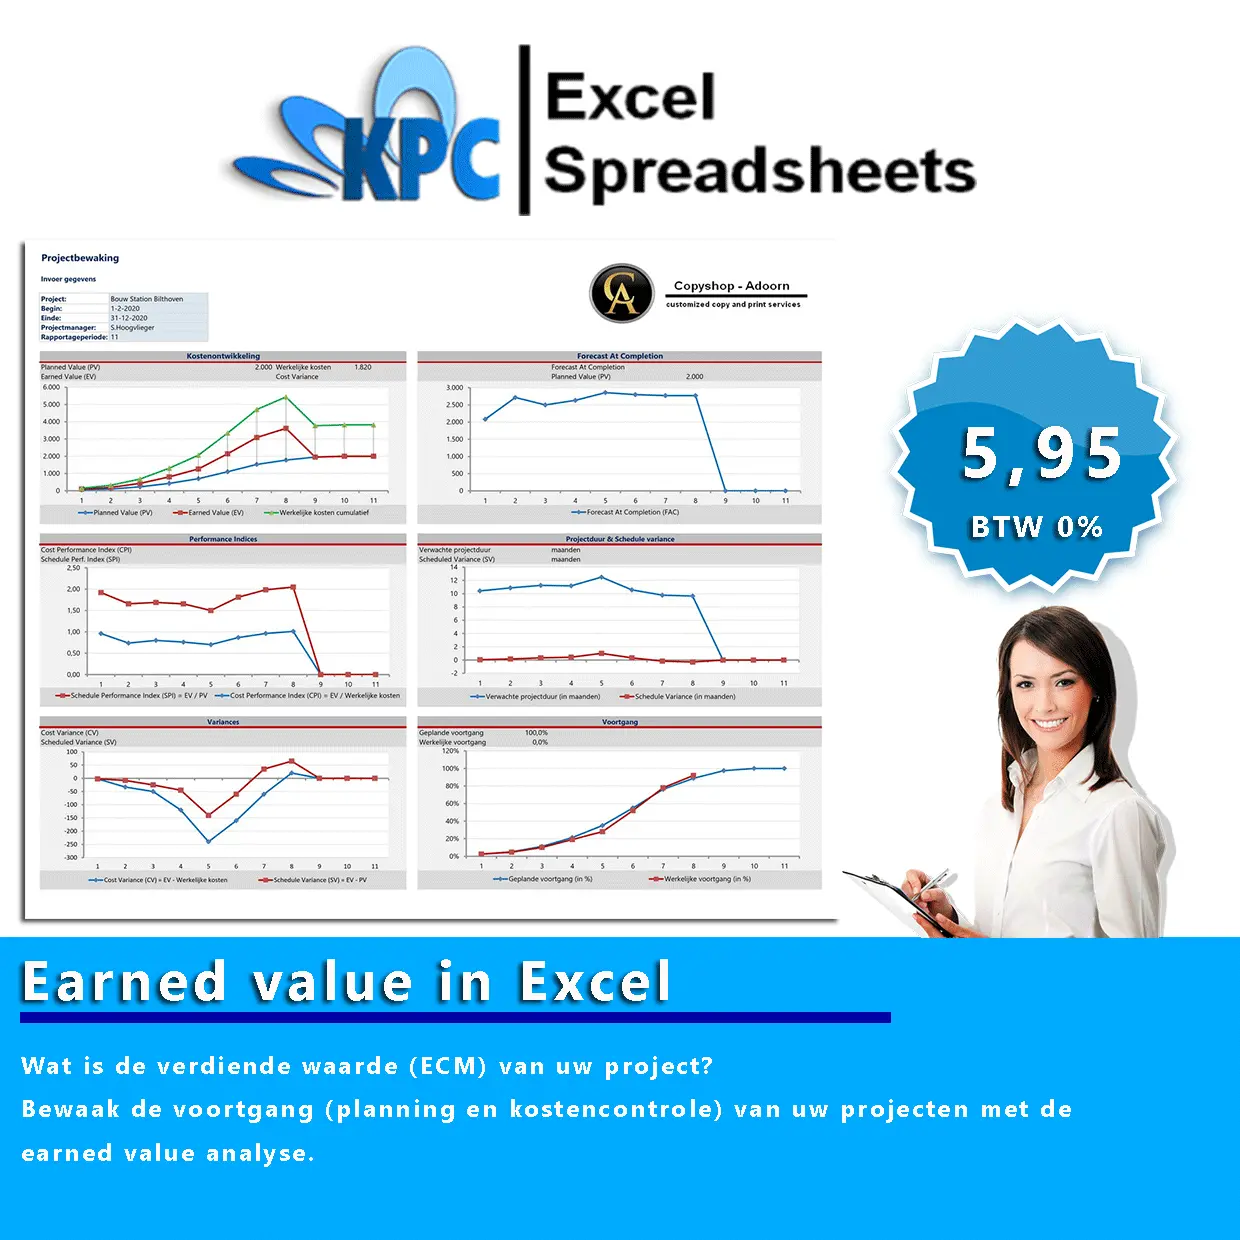 Earned value in Excel